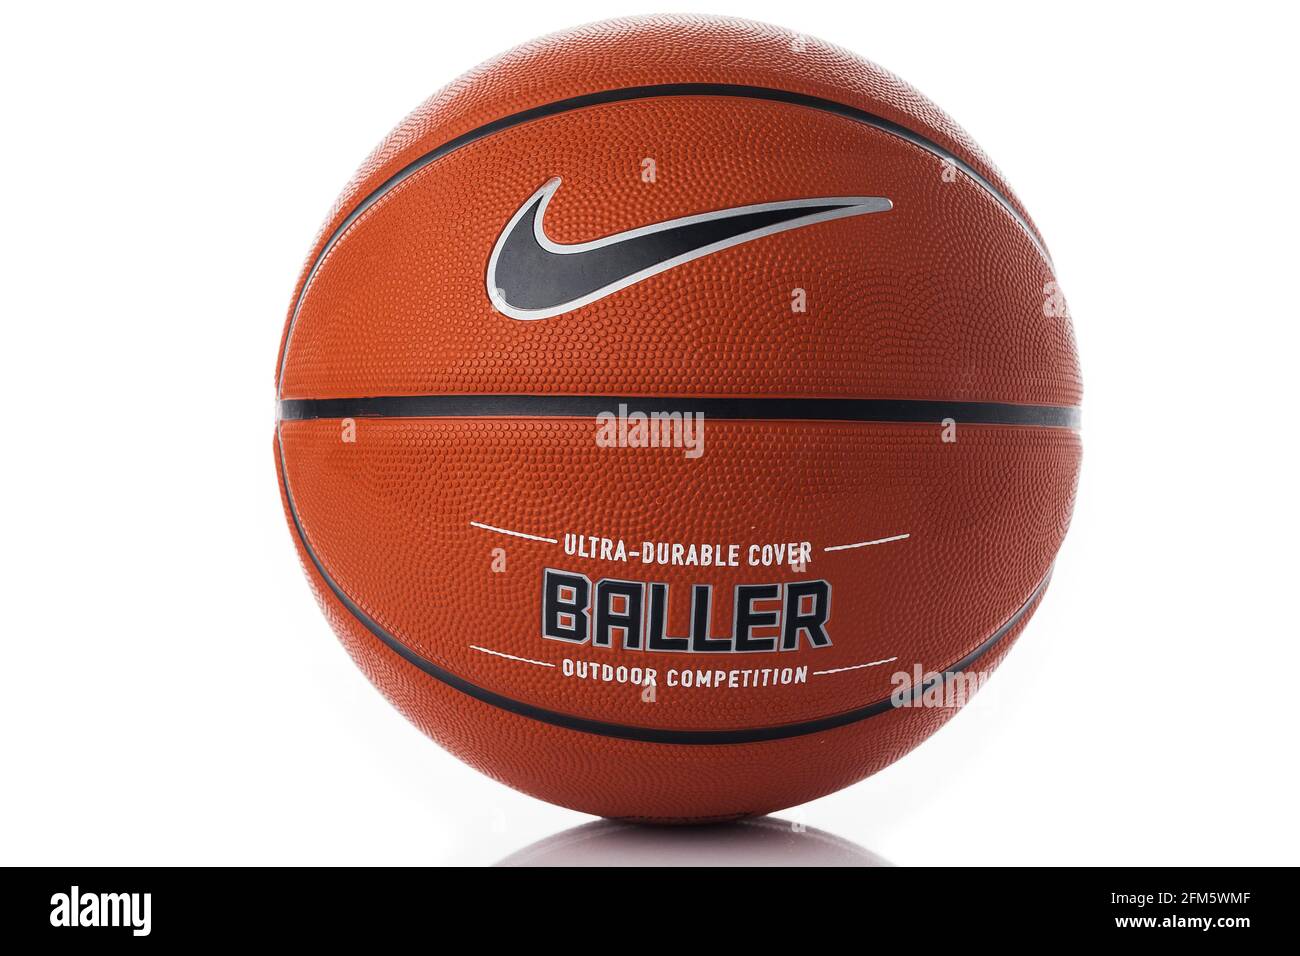 Nike brand, basketball ball Nike Baller. Orange rubber outdoor ball,  ultra-durable cover, close-up on a white background Stock Photo - Alamy